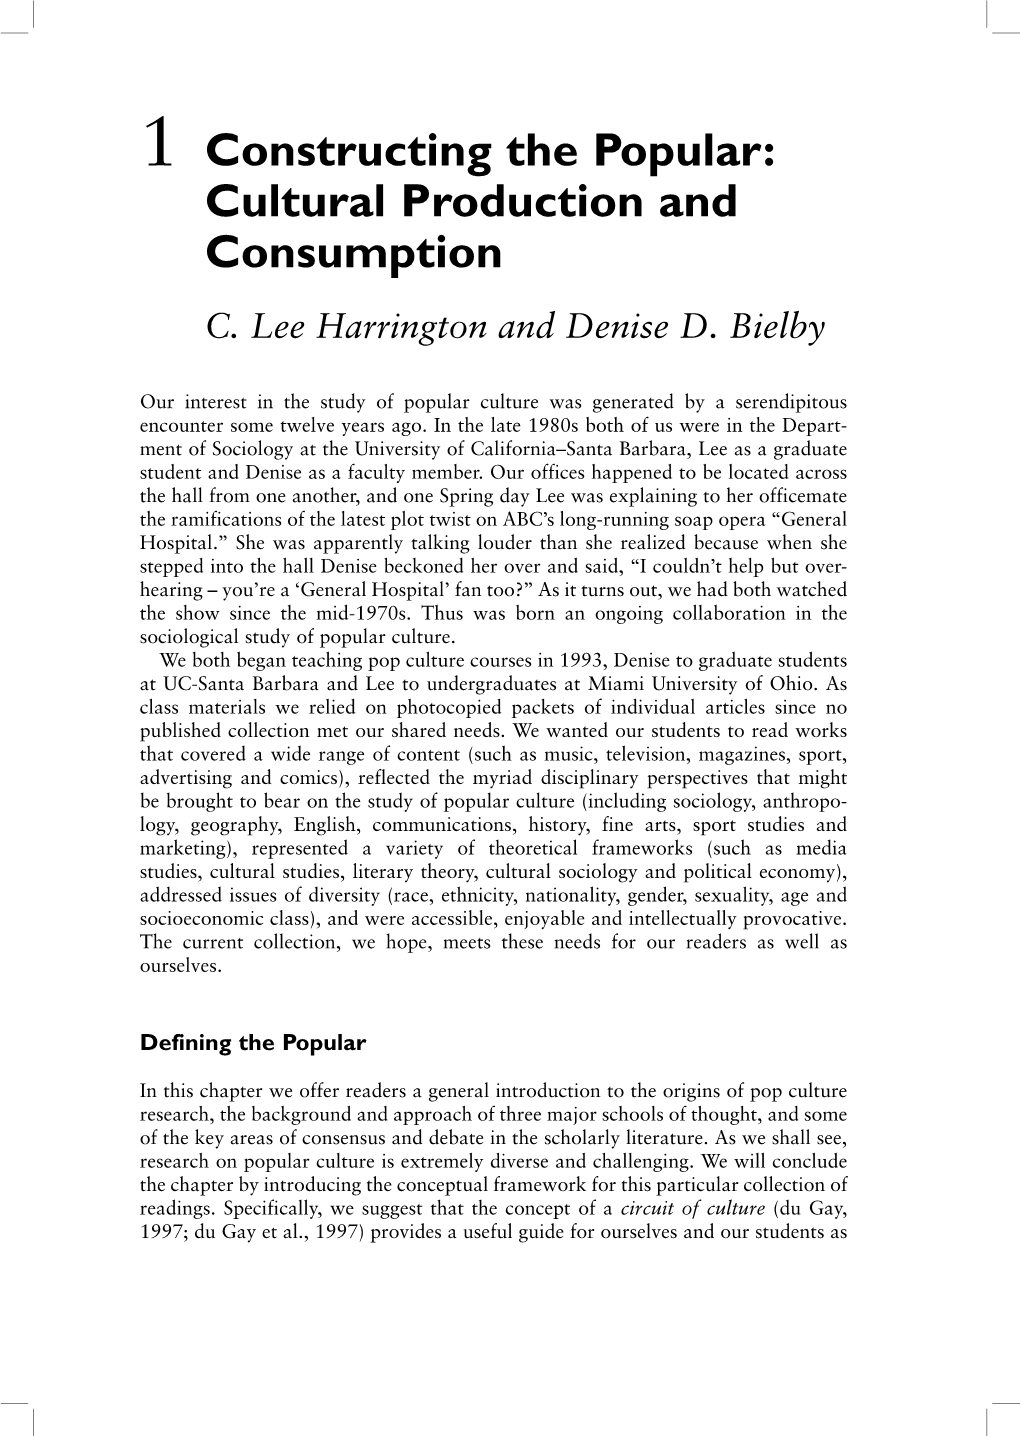 Cultural Production and Consumption